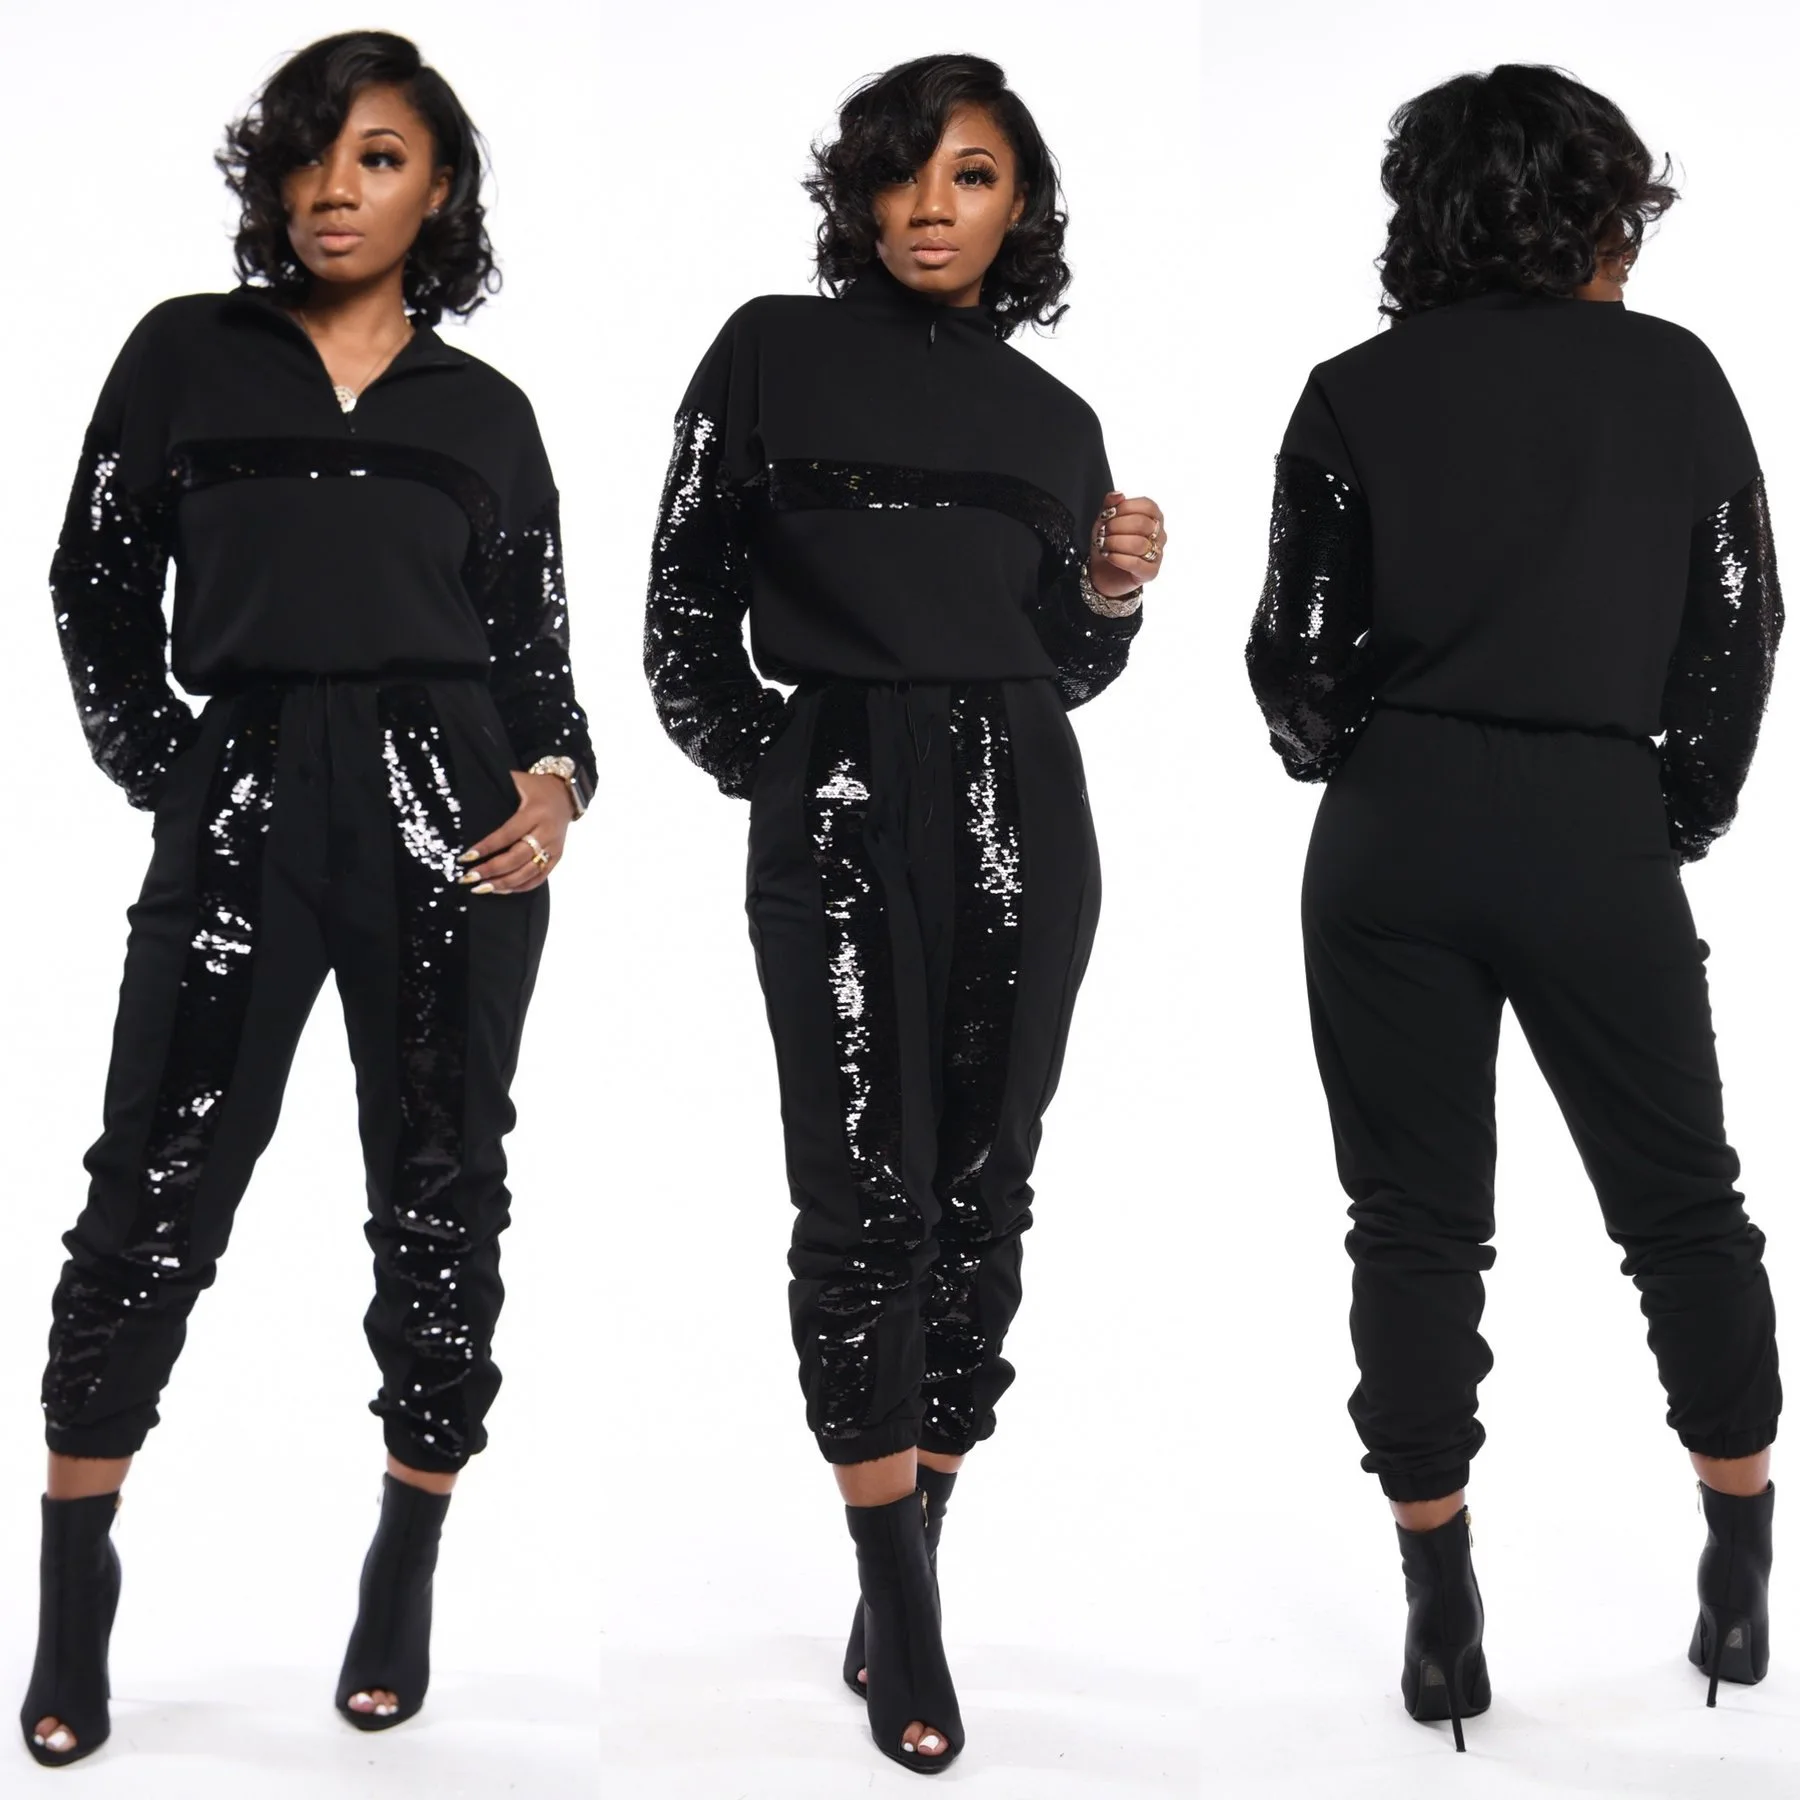 Casual Women Sequin Two Piece Set With Pocket Streetwear Sportsuit Matching Set Shirt + Long Pants Clothes For Women Outfit